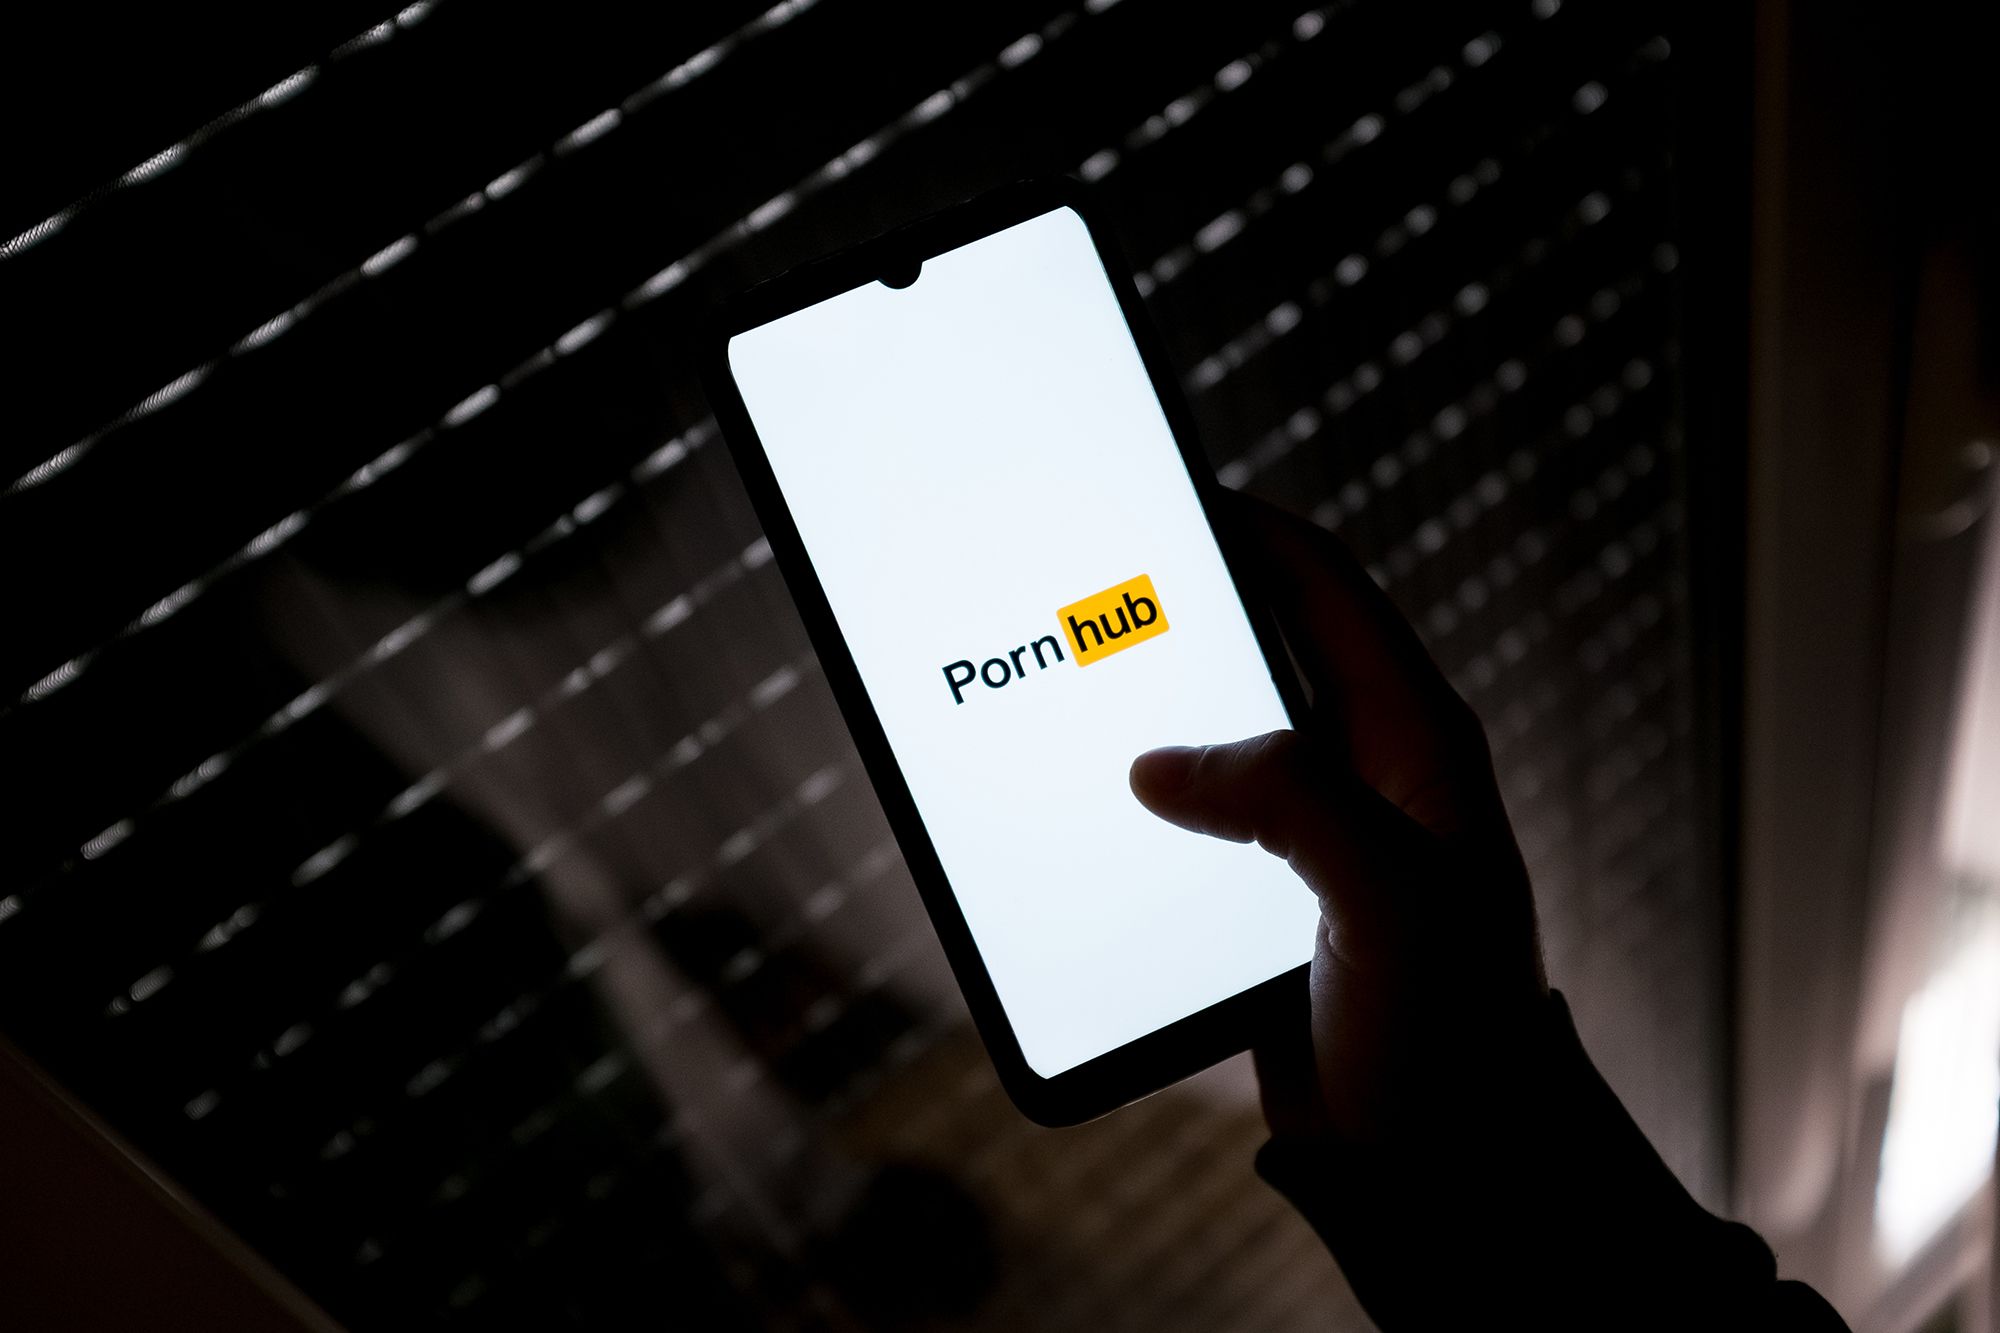 Pprntube - Pornhub asks users, Big Tech for help as states adopt age verification laws  | CNN Business